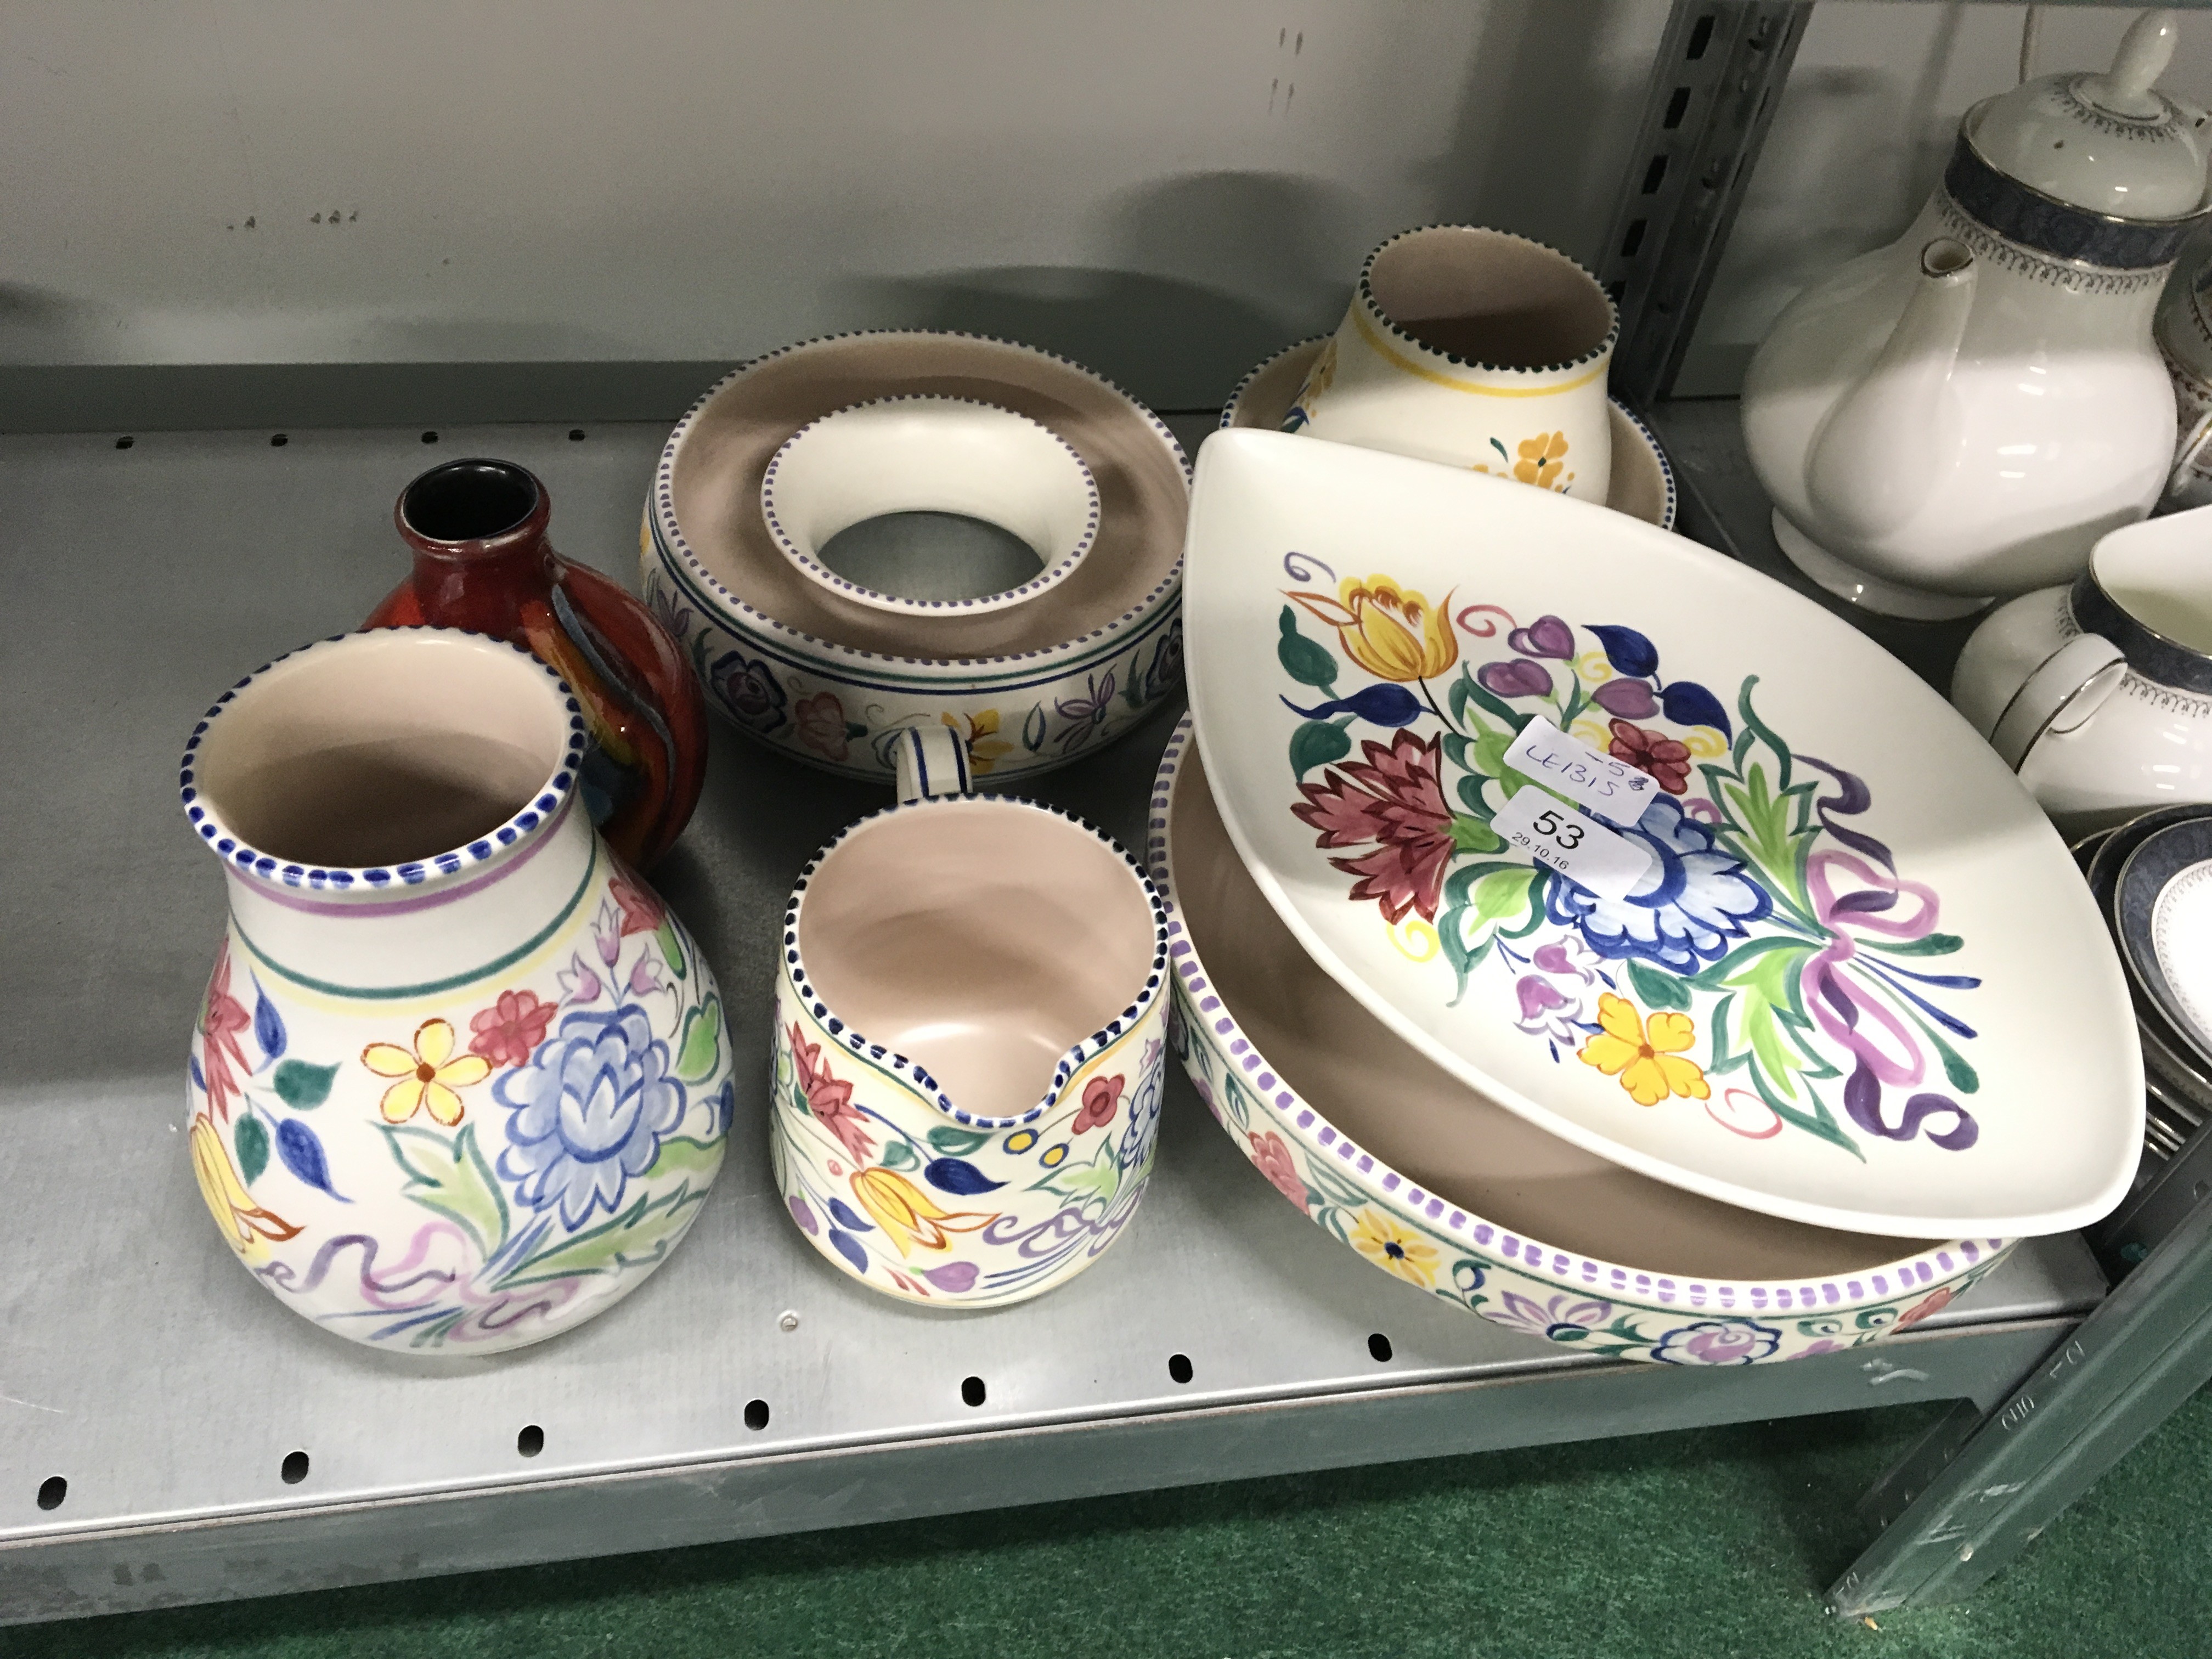 Seven various Poole Pottery white bodied traditional pattern items to include a vase decorated in